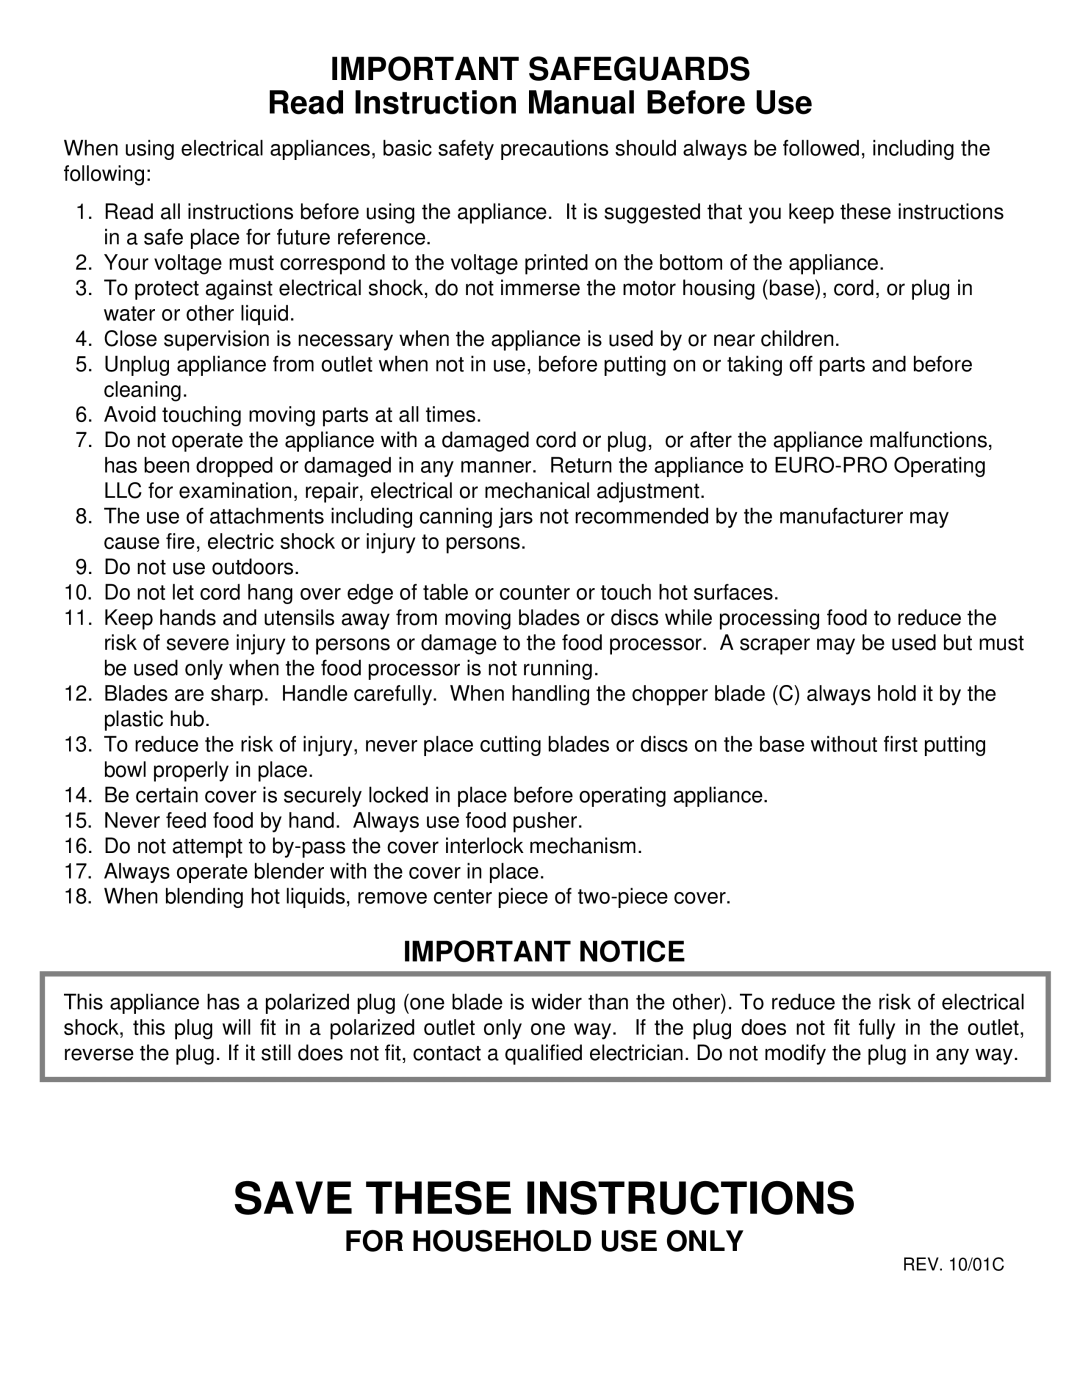 Euro-Pro EP90E instruction manual Save These Instructions, Important Safeguards, Important Notice, For Household Use Only 